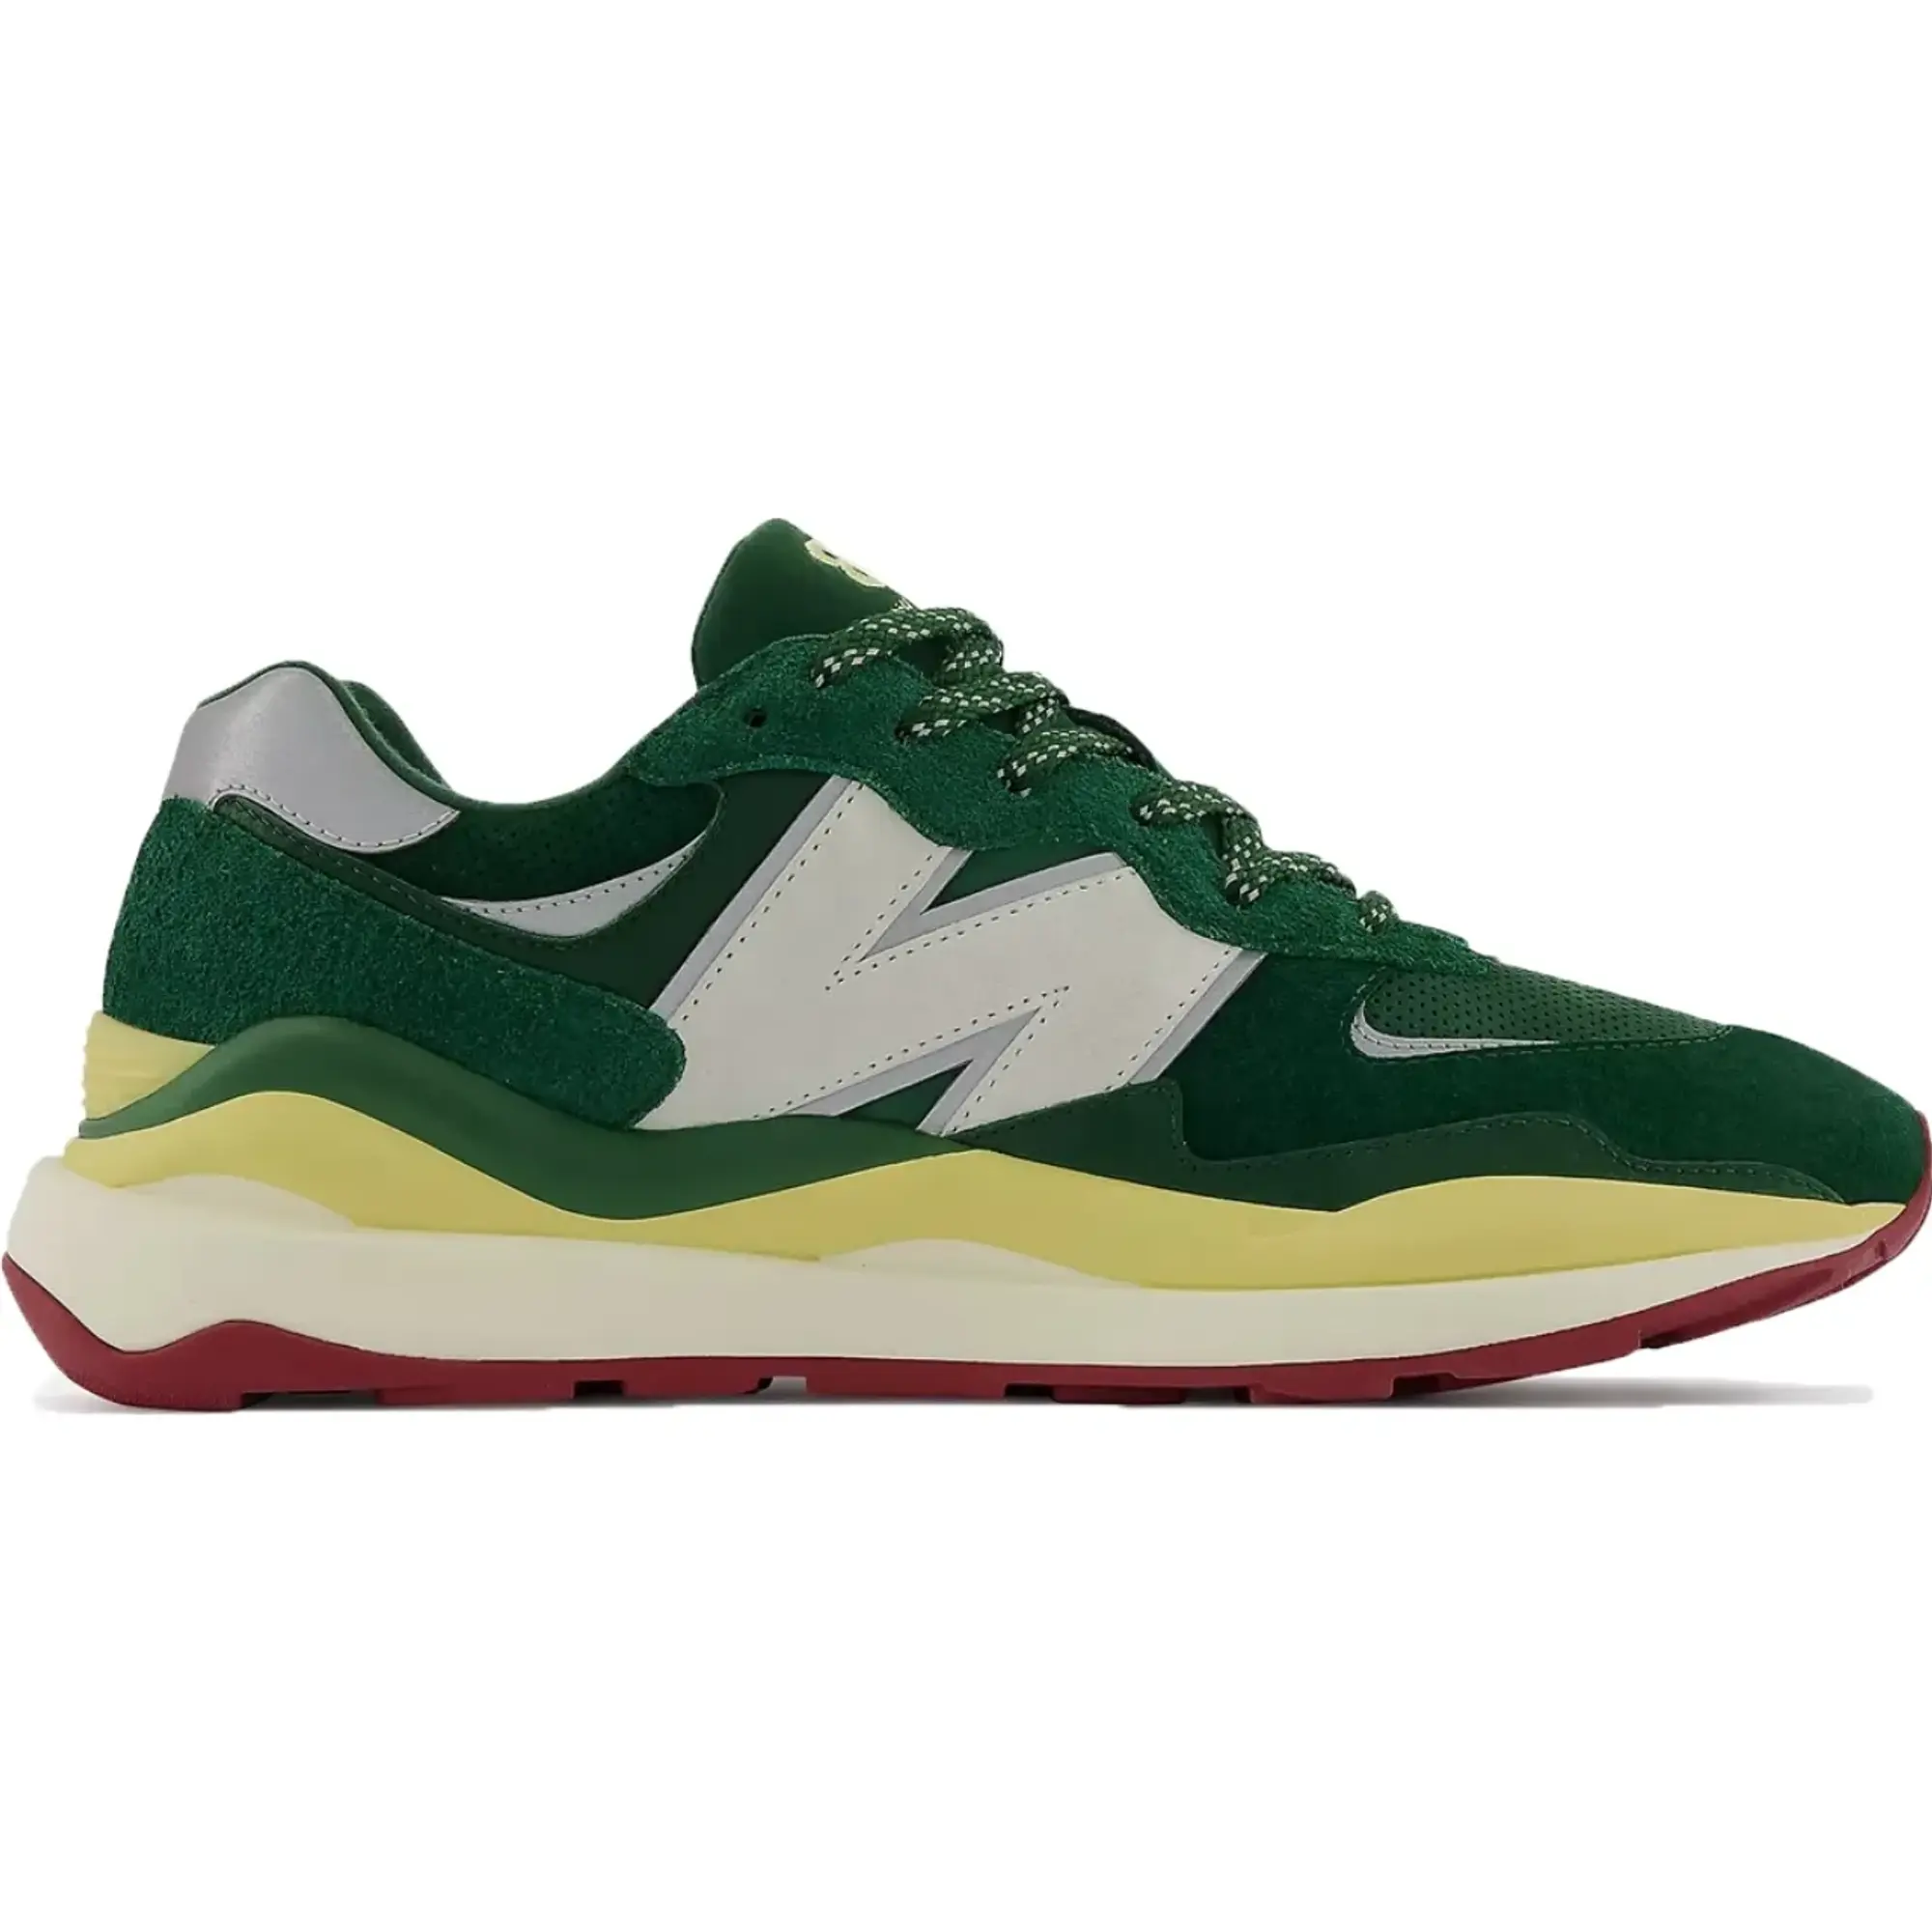 New Balance x Bricks and Wood 57/40 Forest Green